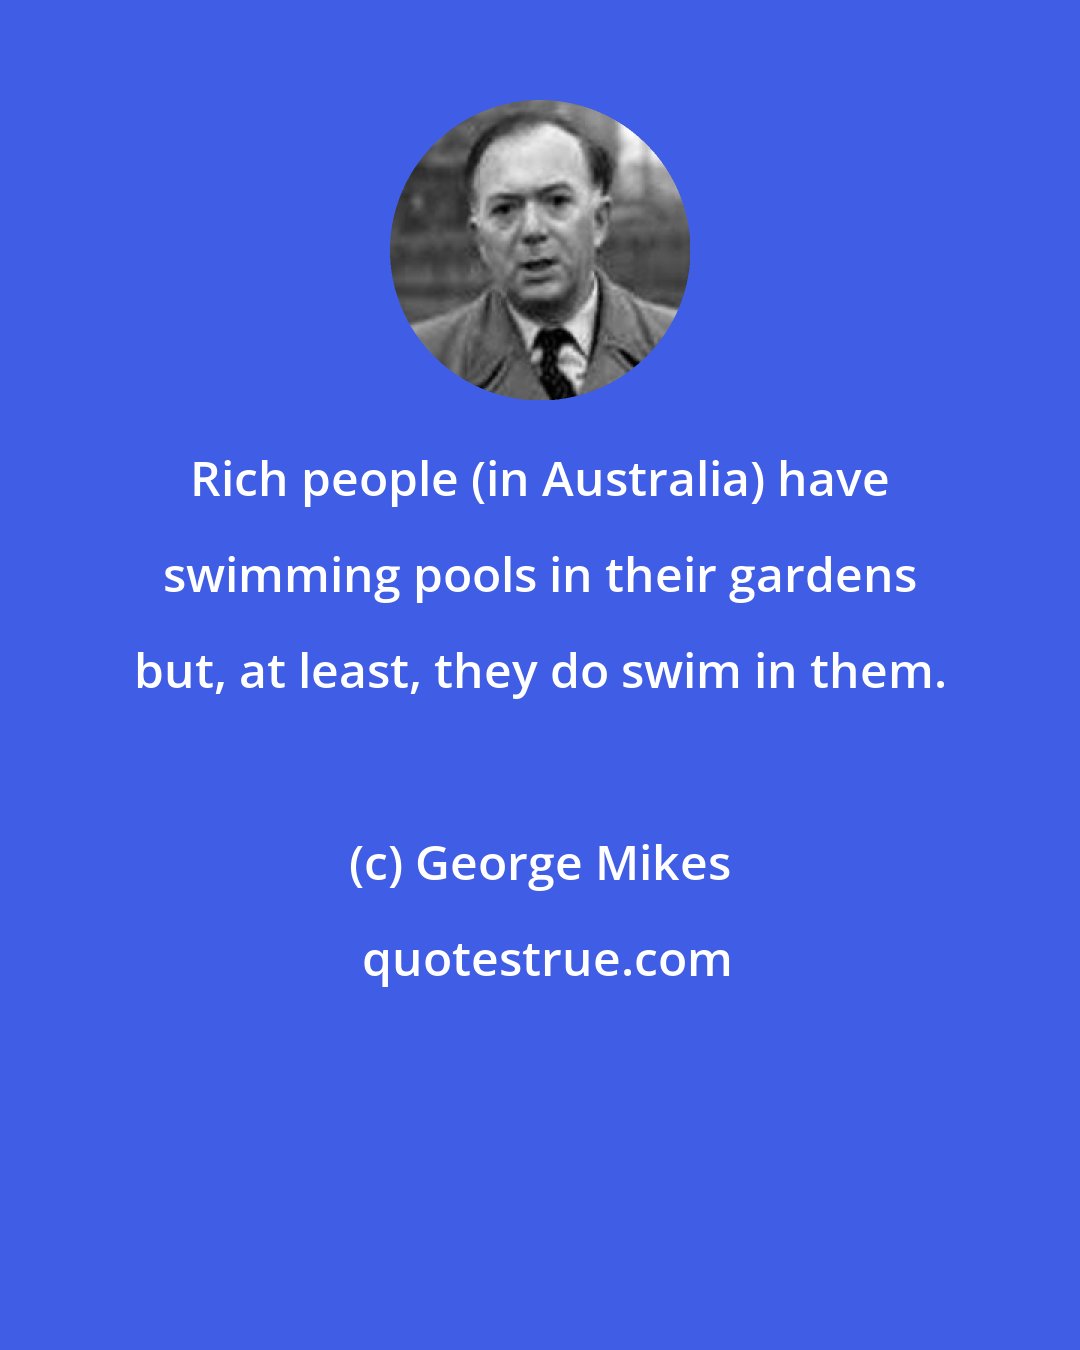 George Mikes: Rich people (in Australia) have swimming pools in their gardens but, at least, they do swim in them.